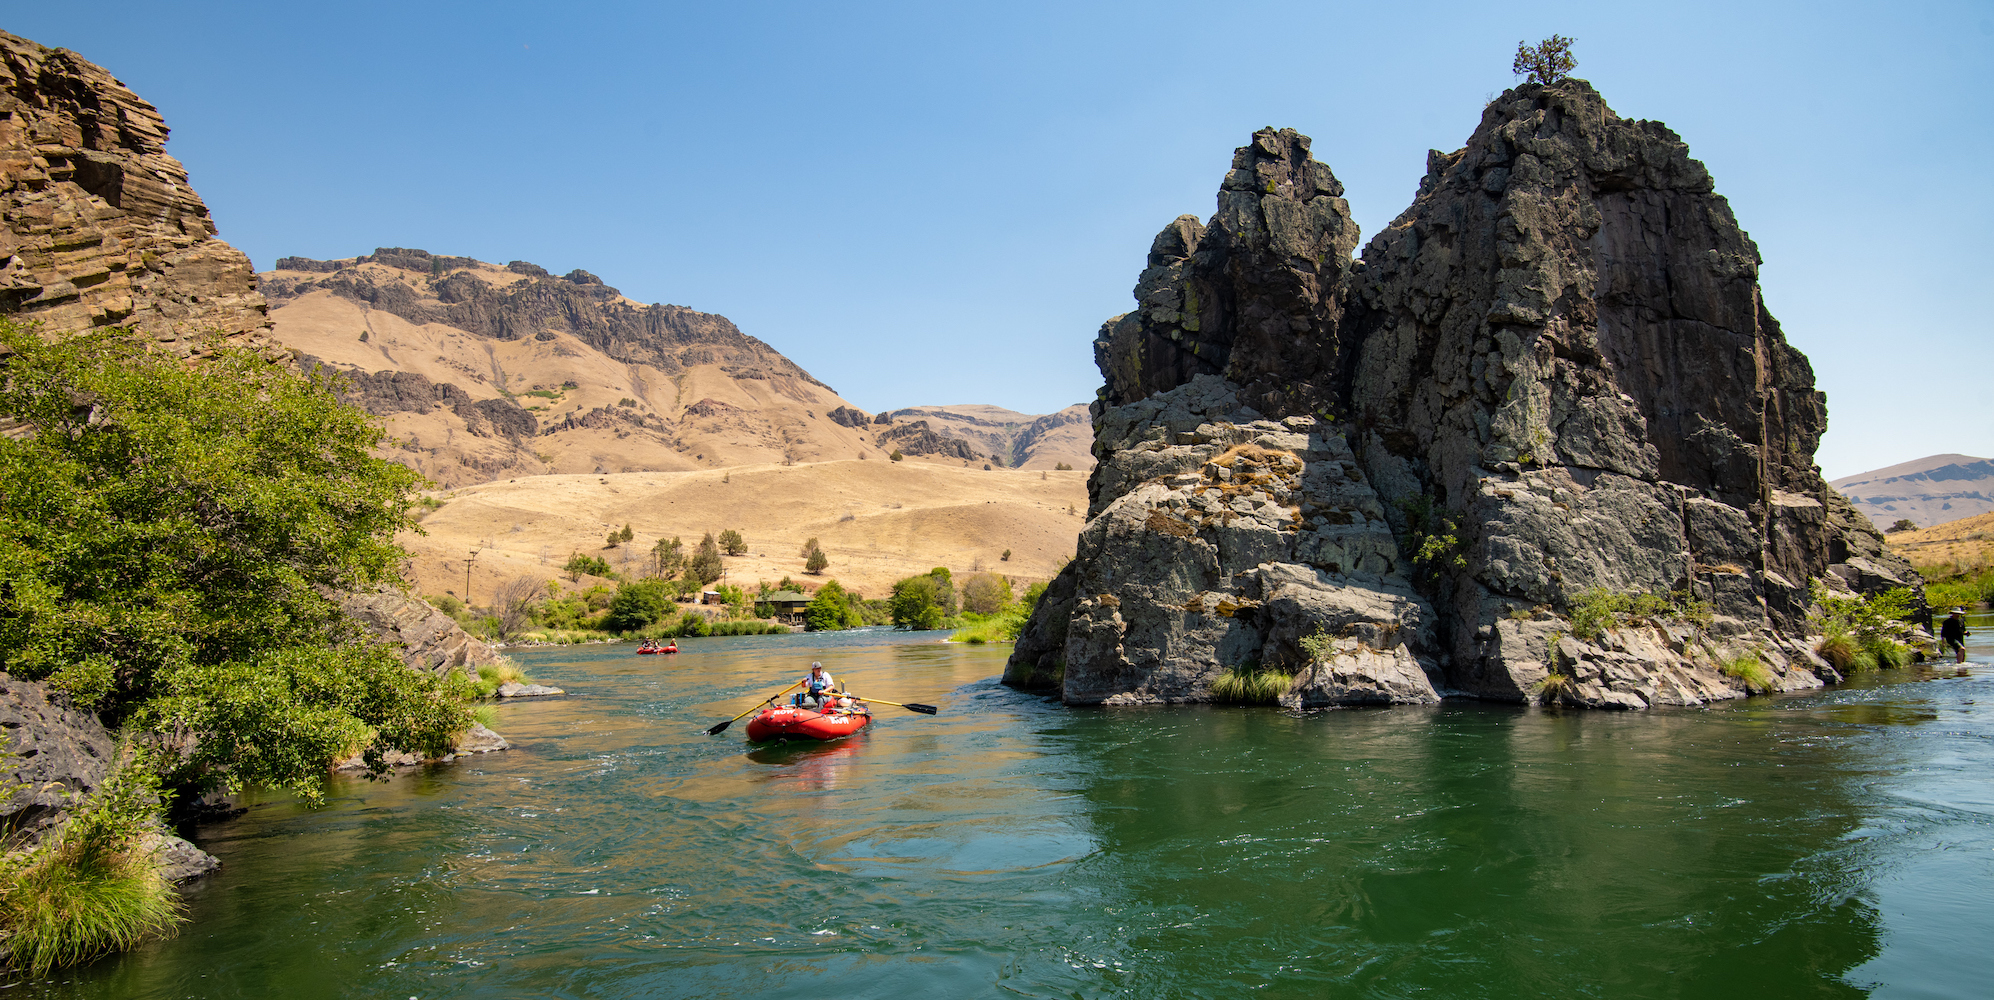 Whitewater rafting the Deschutes River in Oregon